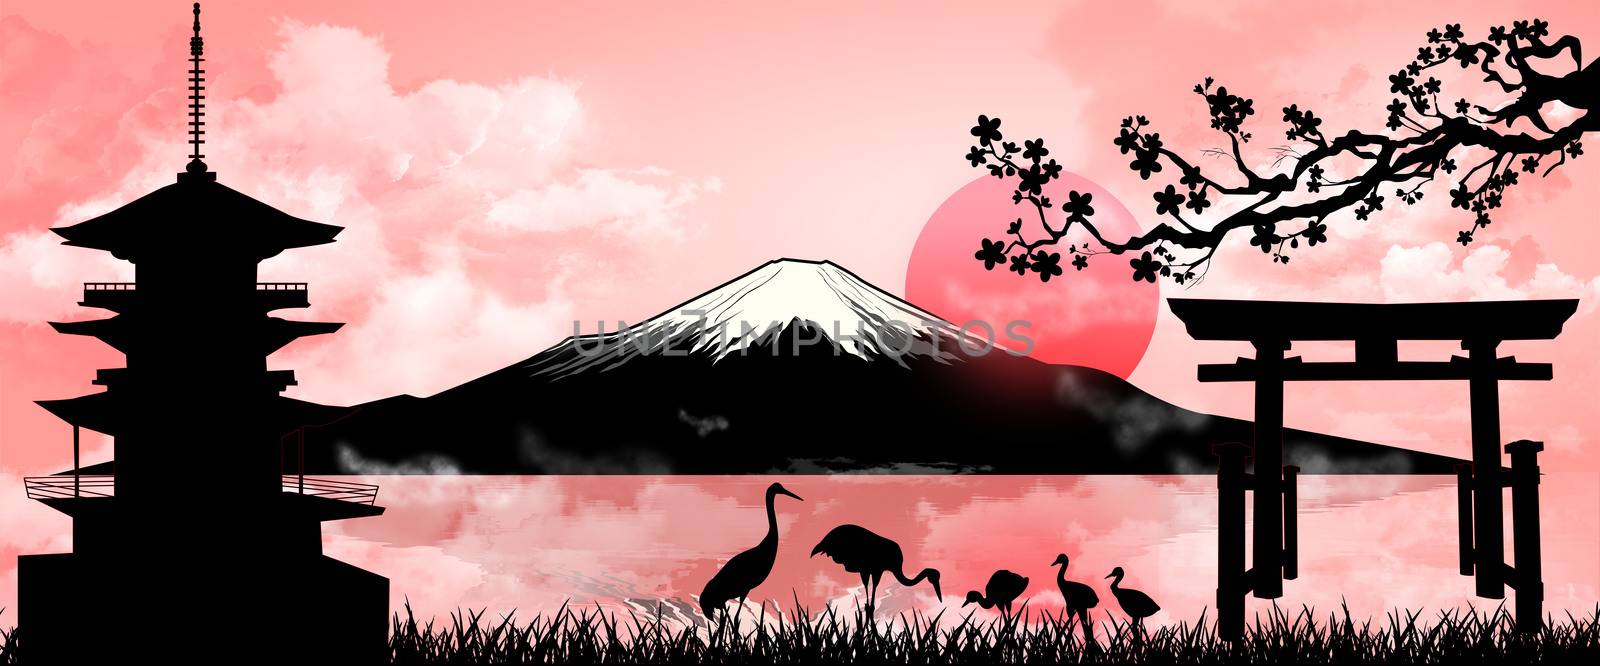 Mount Fuji on evening sunset by liolle